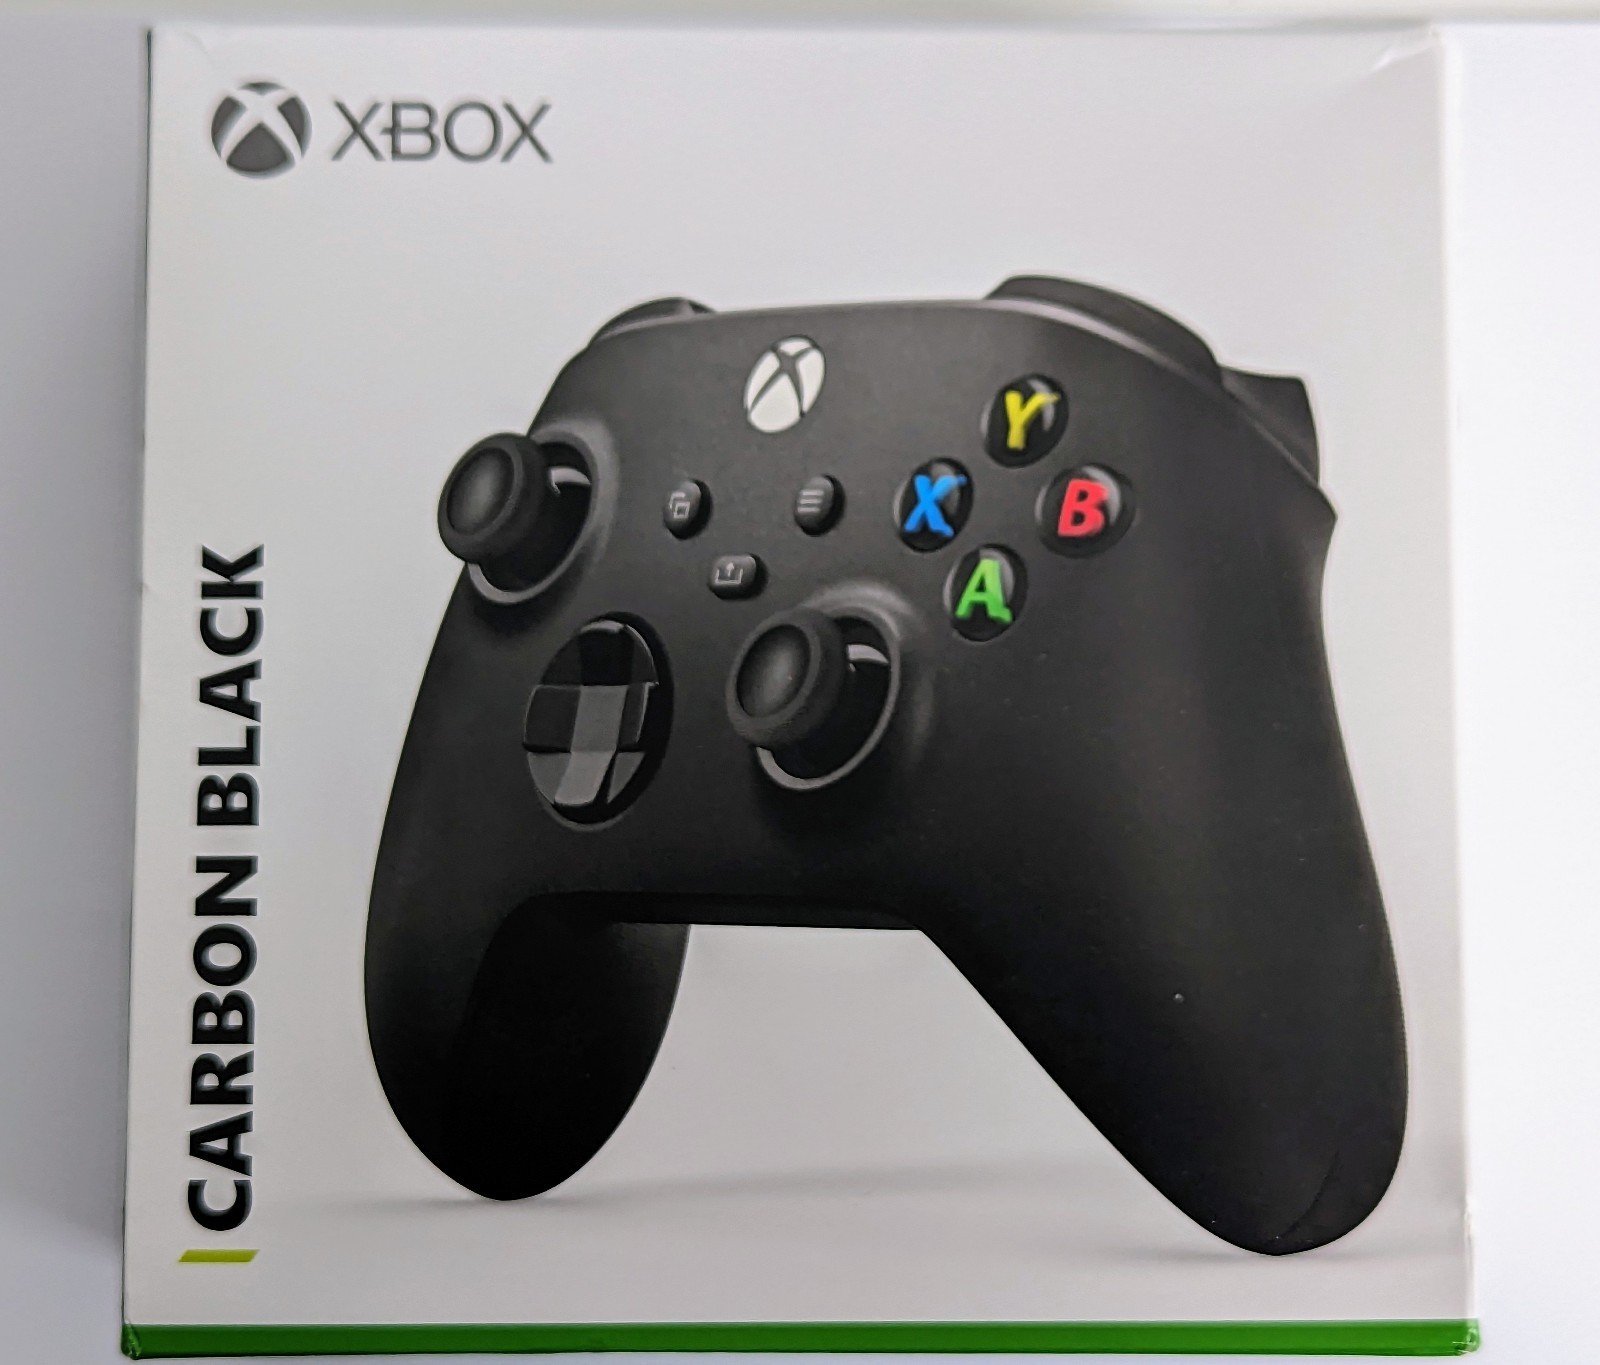 Microsoft Wireless Controller for Xbox Series X/S - Carbon Black - Fast Shipping m9iWnTTDn